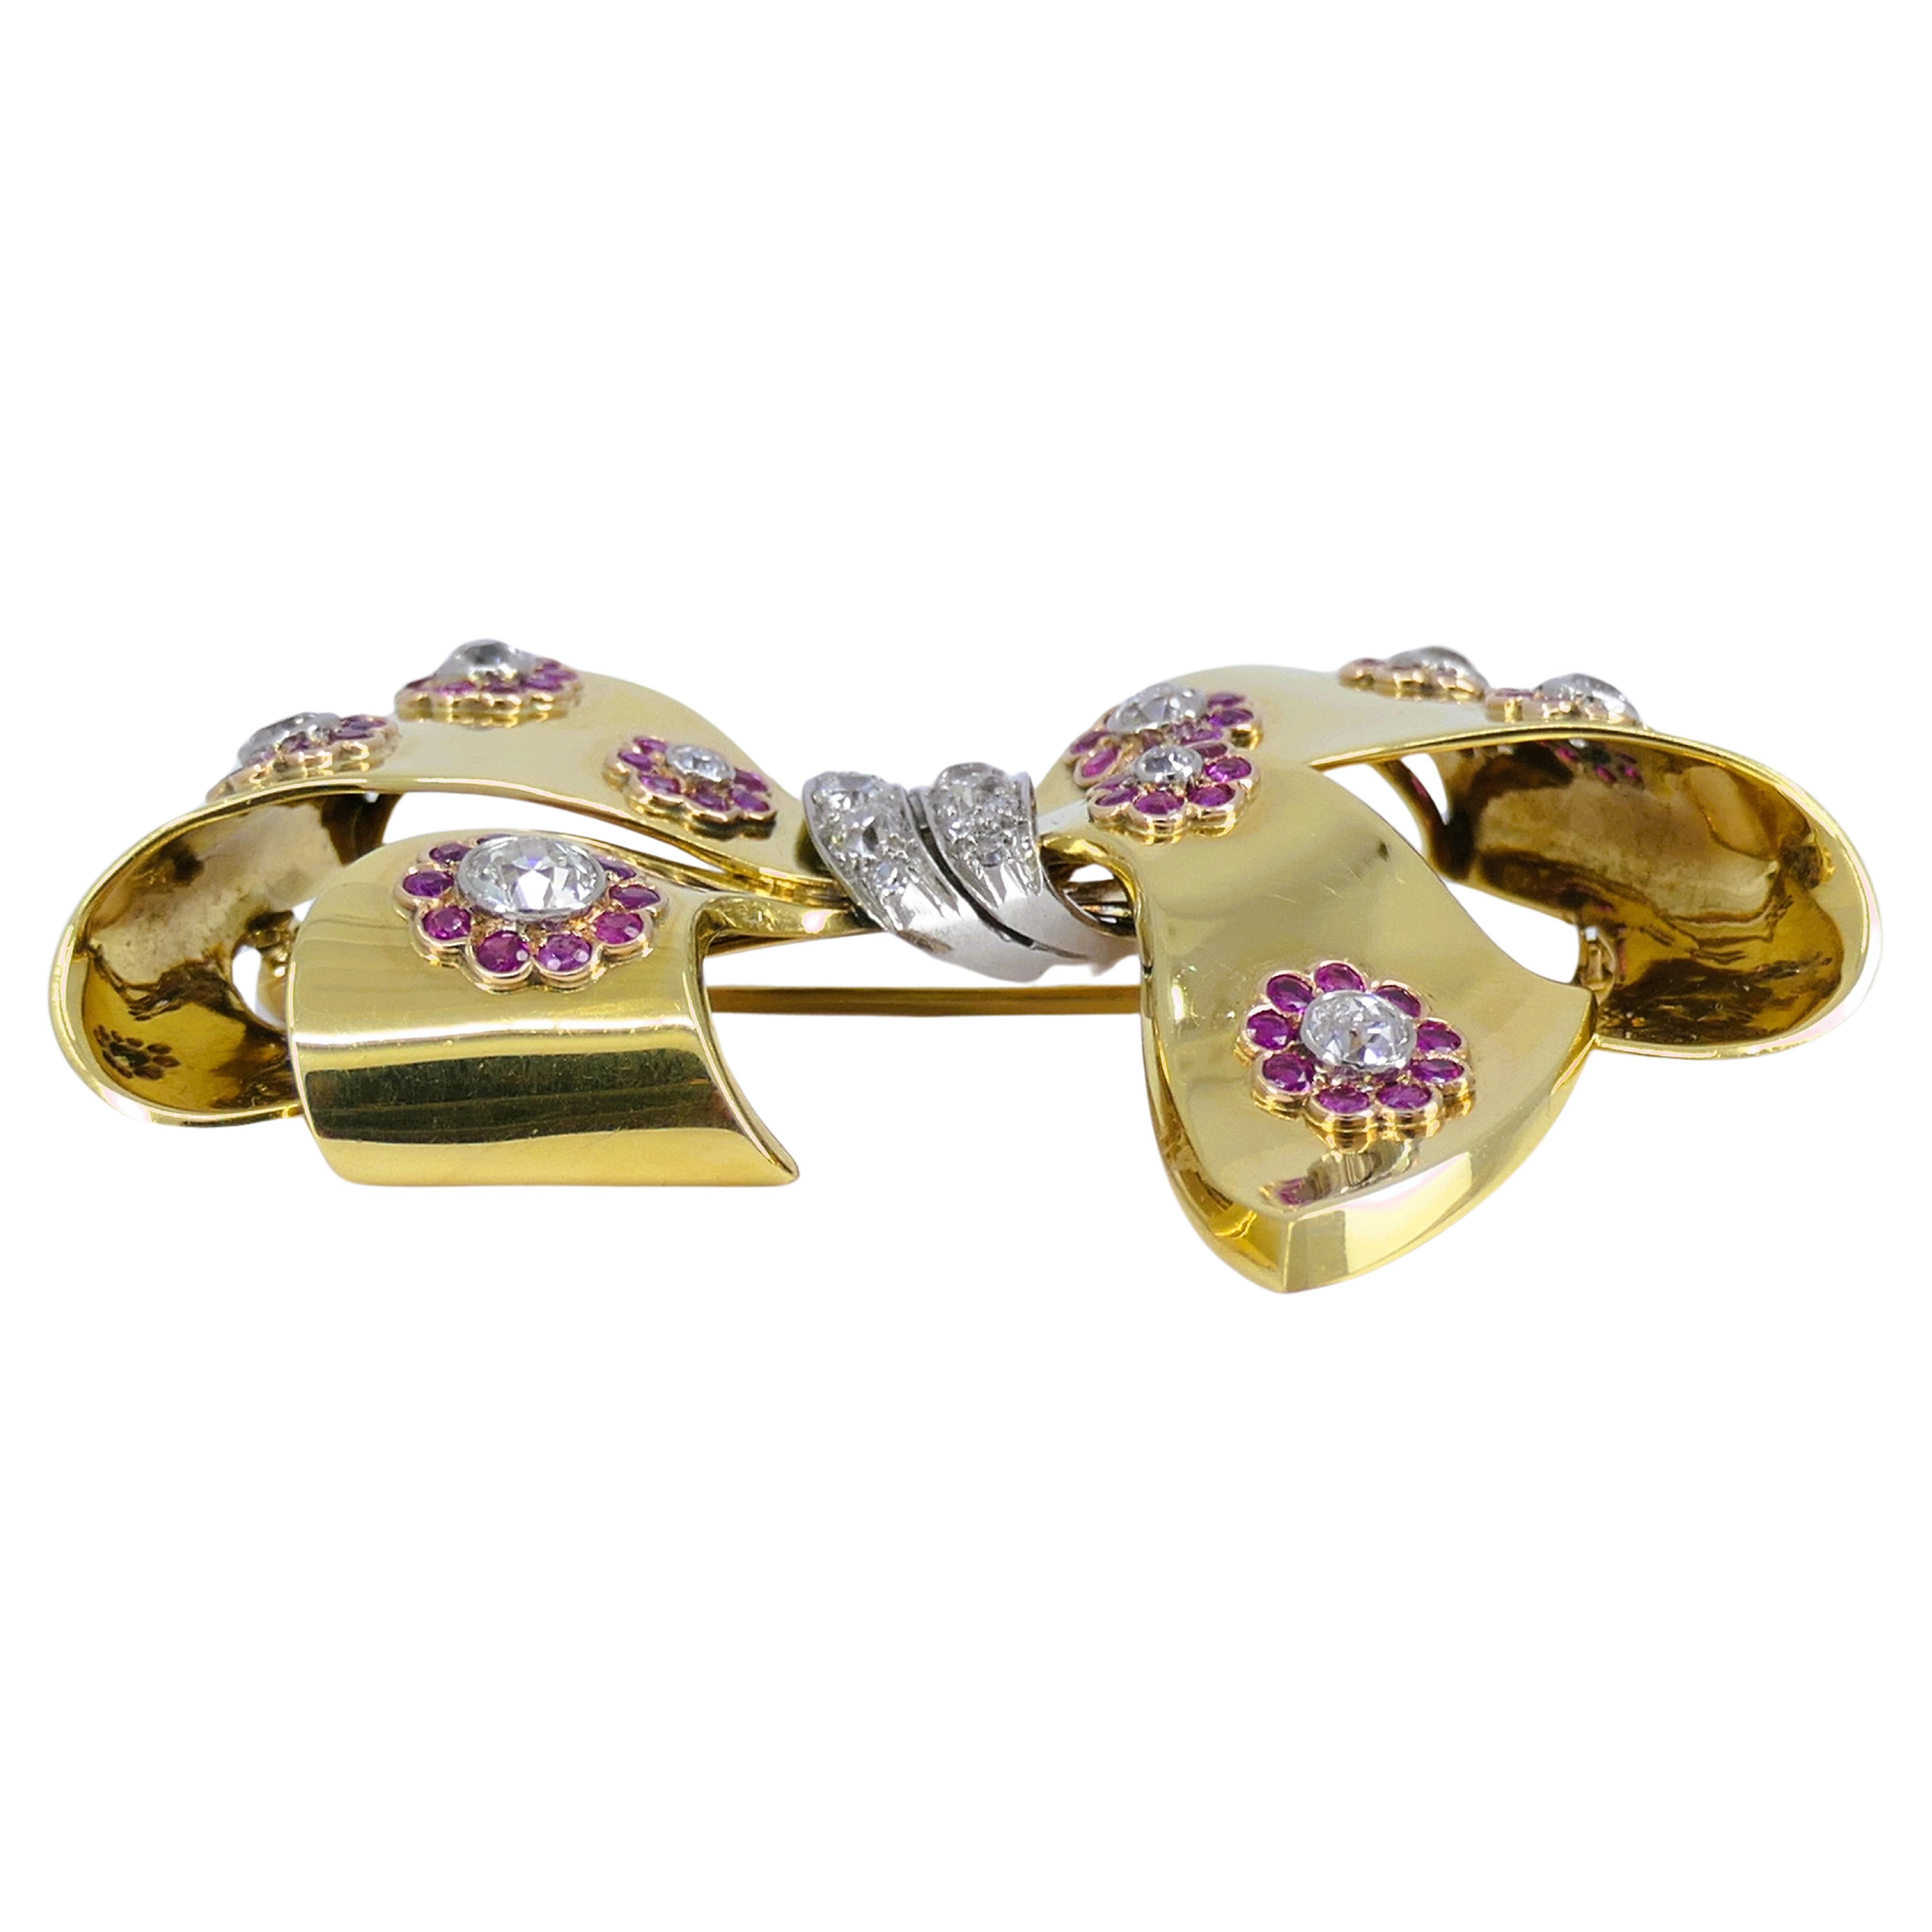 Retro Bow Brooch Pin 18k Gold Ruby Diamond Estate Jewelry In Good Condition For Sale In Beverly Hills, CA